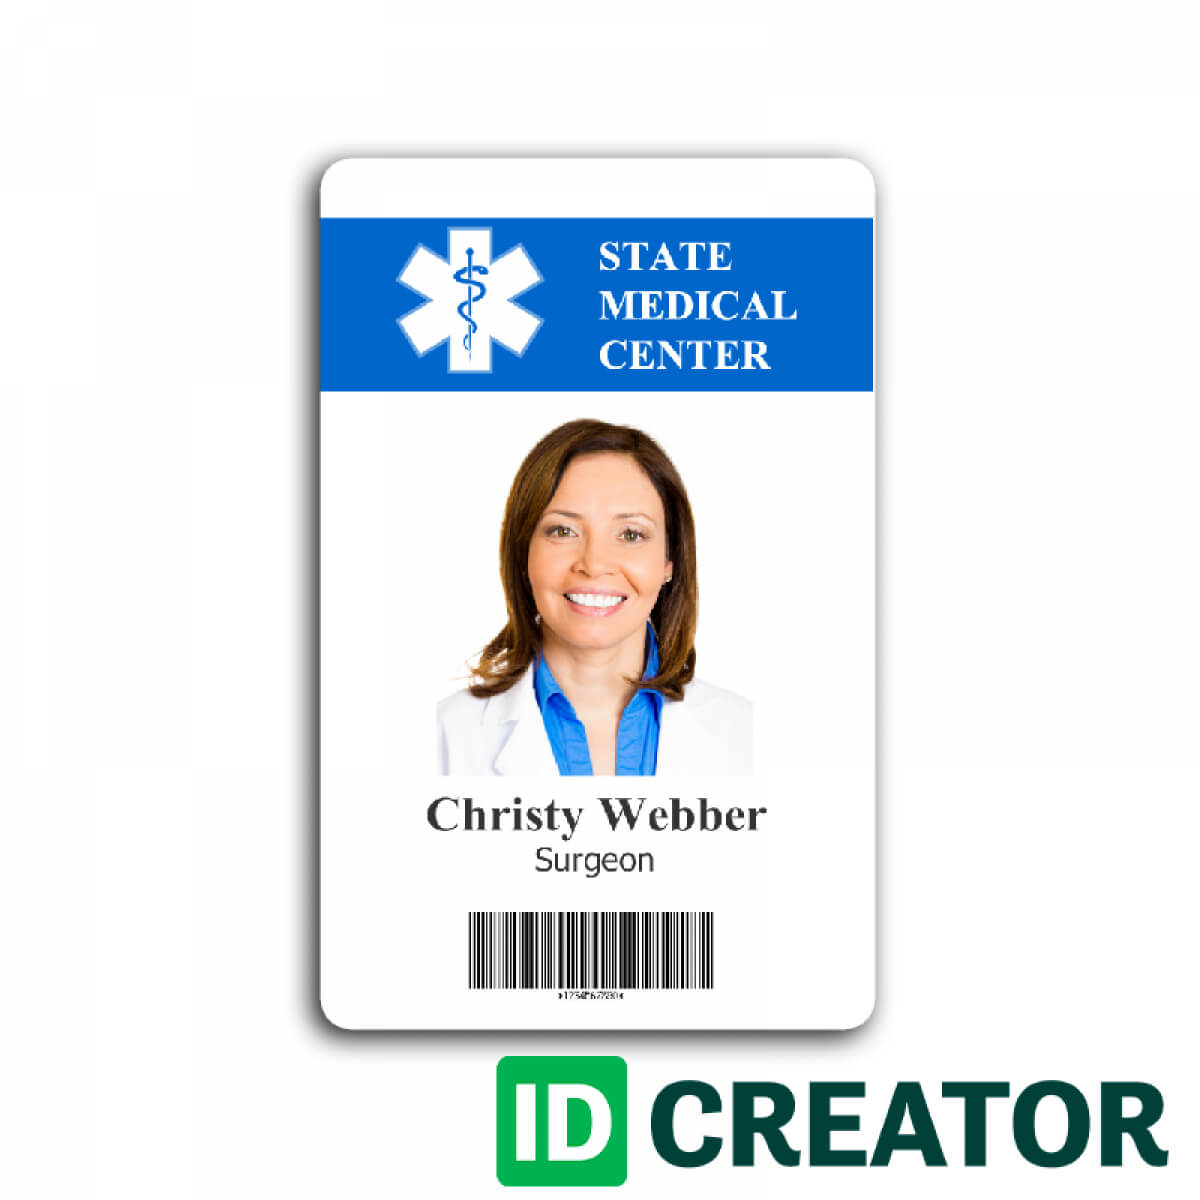 hospital id card template free download